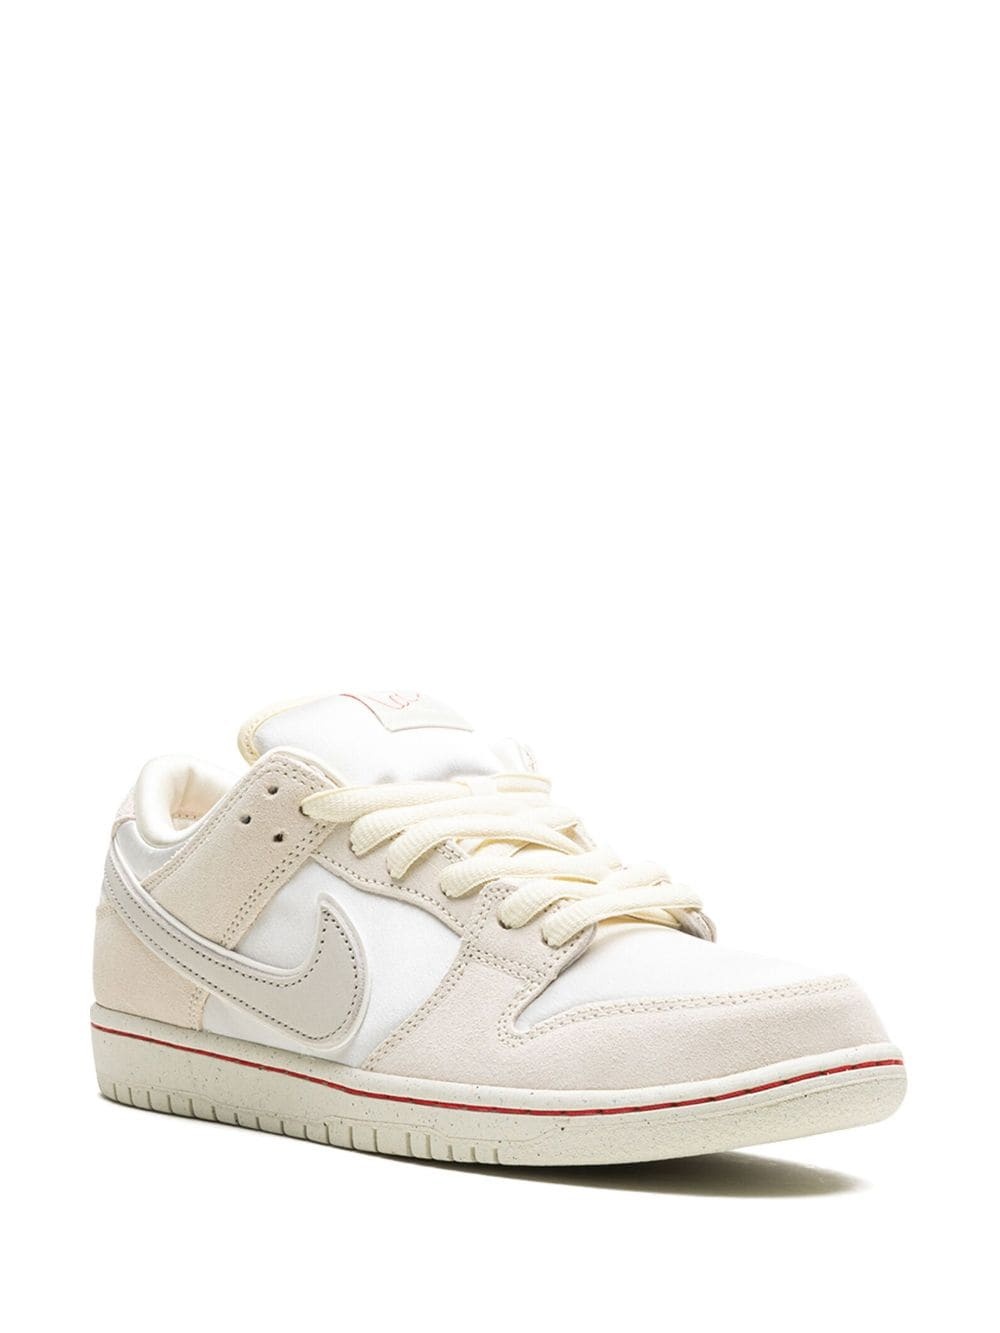 SB Dunk Low "Valentine's Day - Low Love Found" sneakers - 2